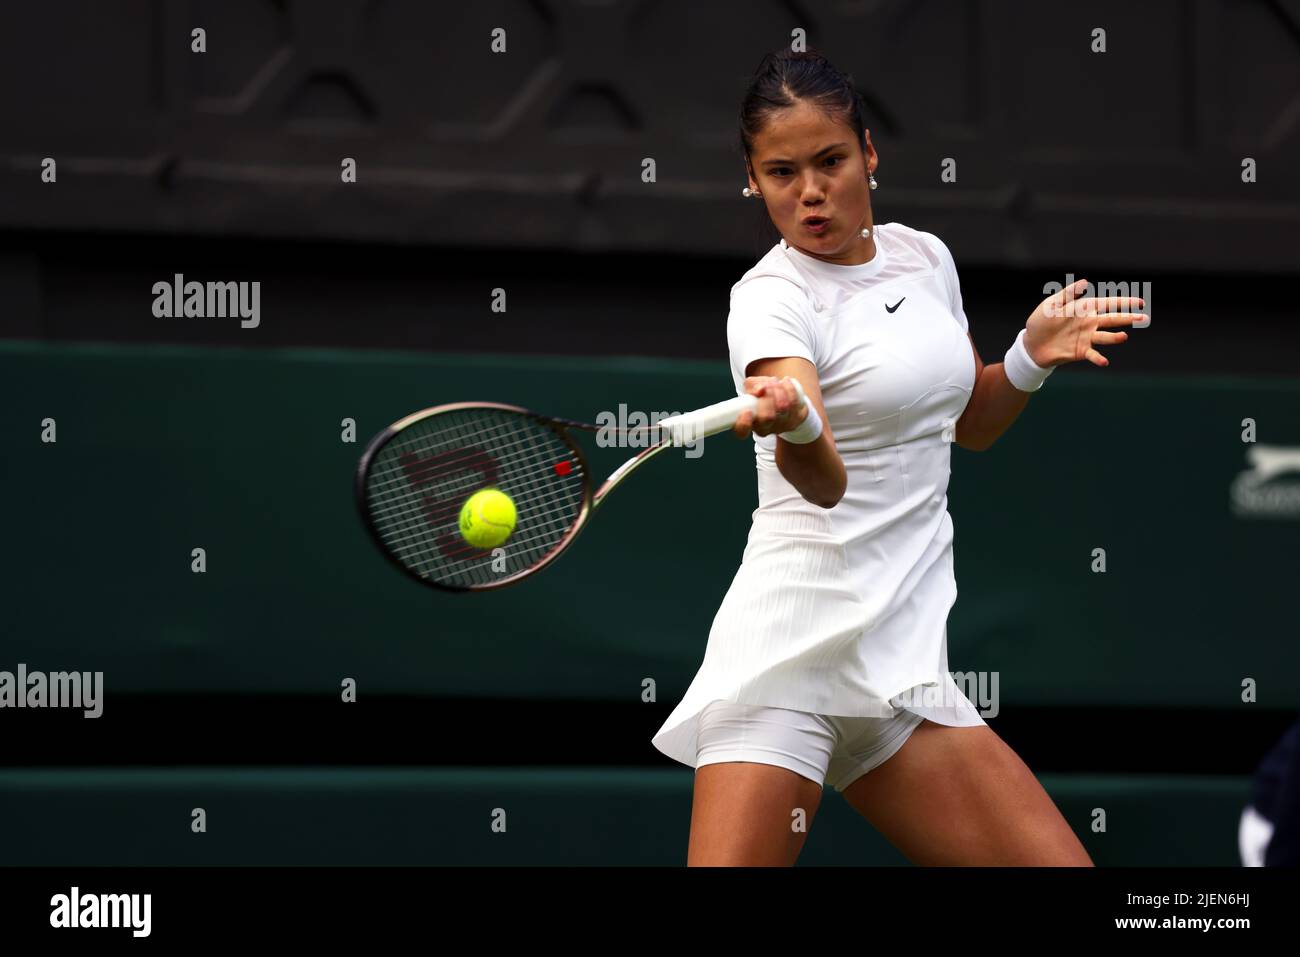 London, 27 June 2022 - Great Britain's Emma Raducanu in action during her opening round match against Alison Van Uytvanck on Centre Court at Wimbledon. Credit: Adam Stoltman/Alamy Live News Stock Photo